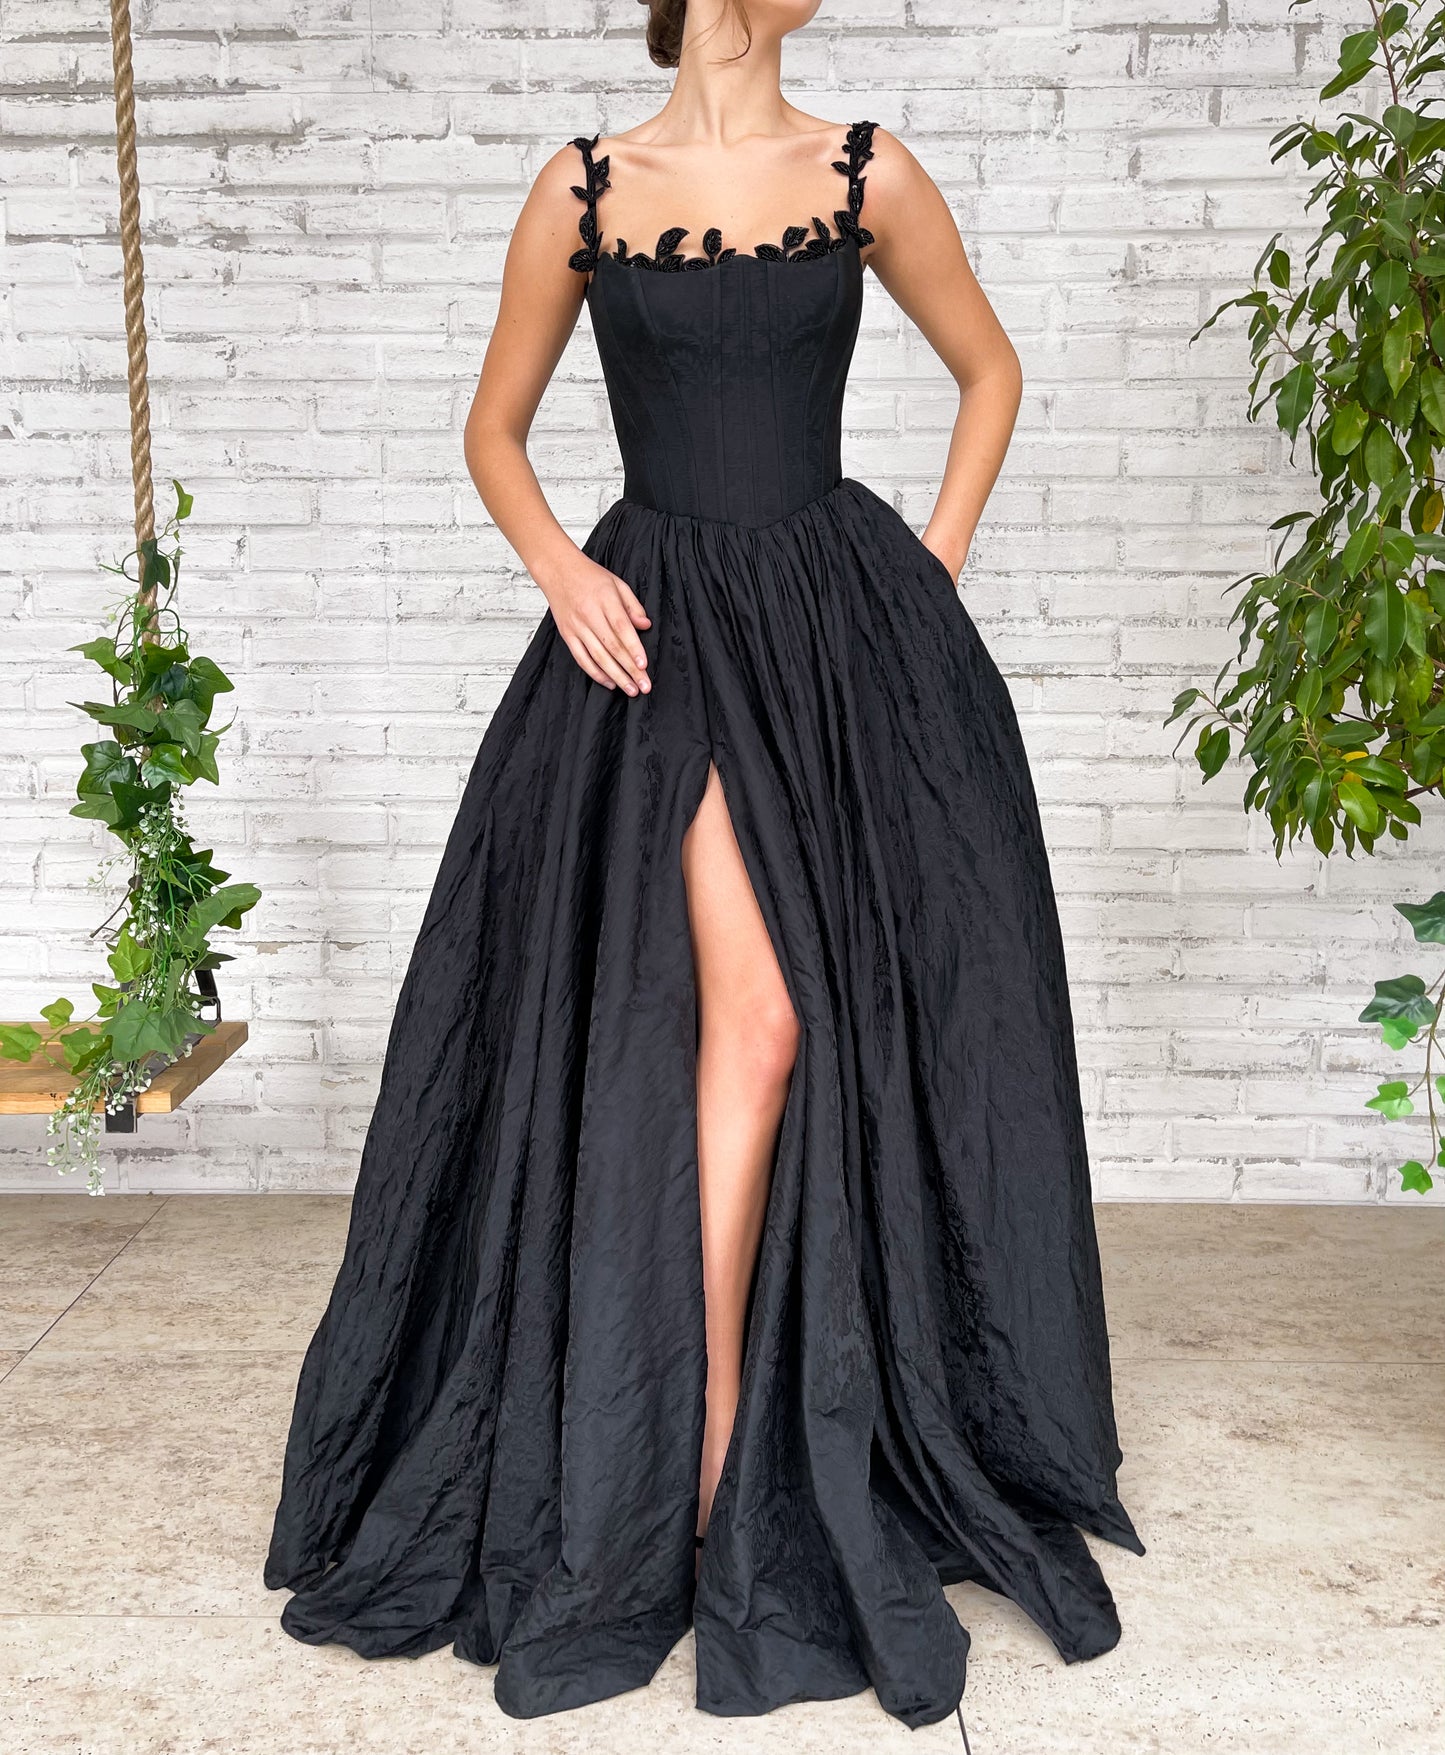 Black A-Line dress with off the shoulder sleeves and embroidery